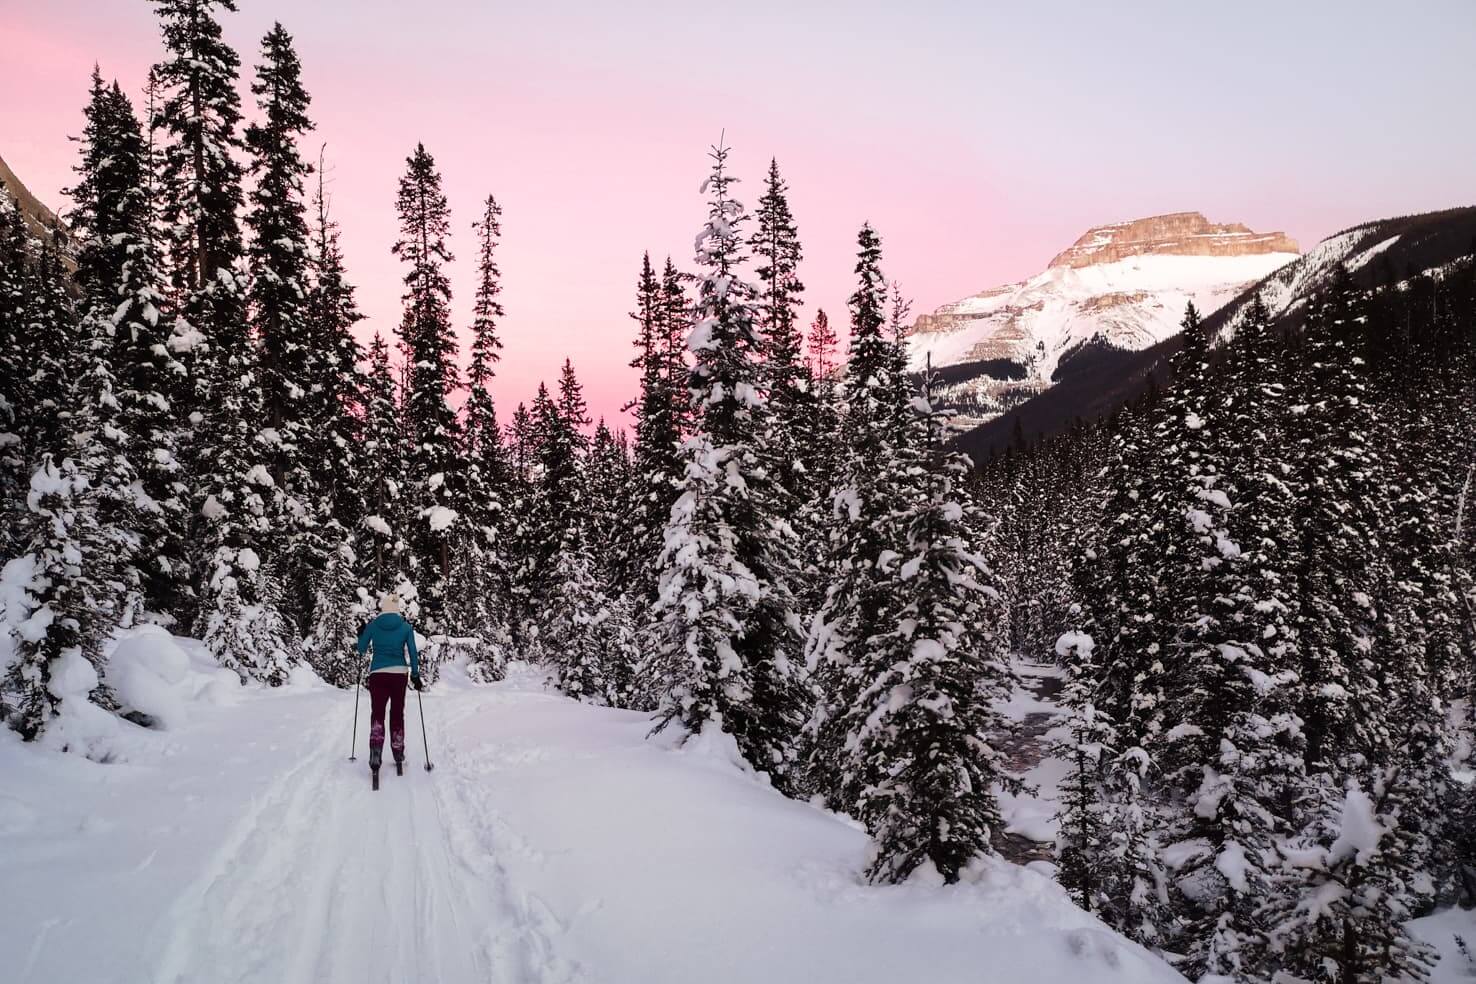 Cross country ski trails in Banff National Park - Shadow Lake